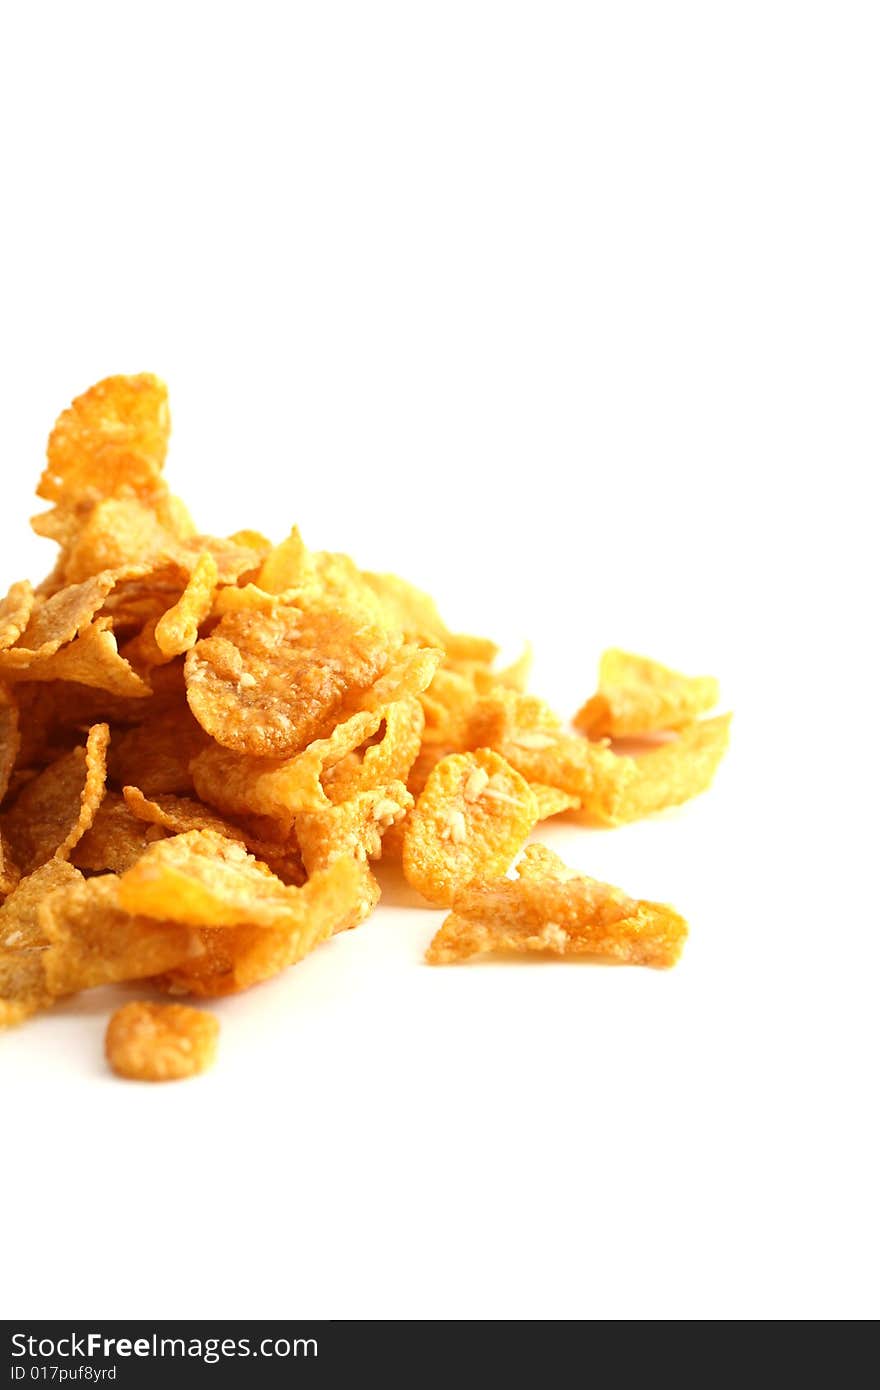 A heap on cornflakes isoltaed on a white background